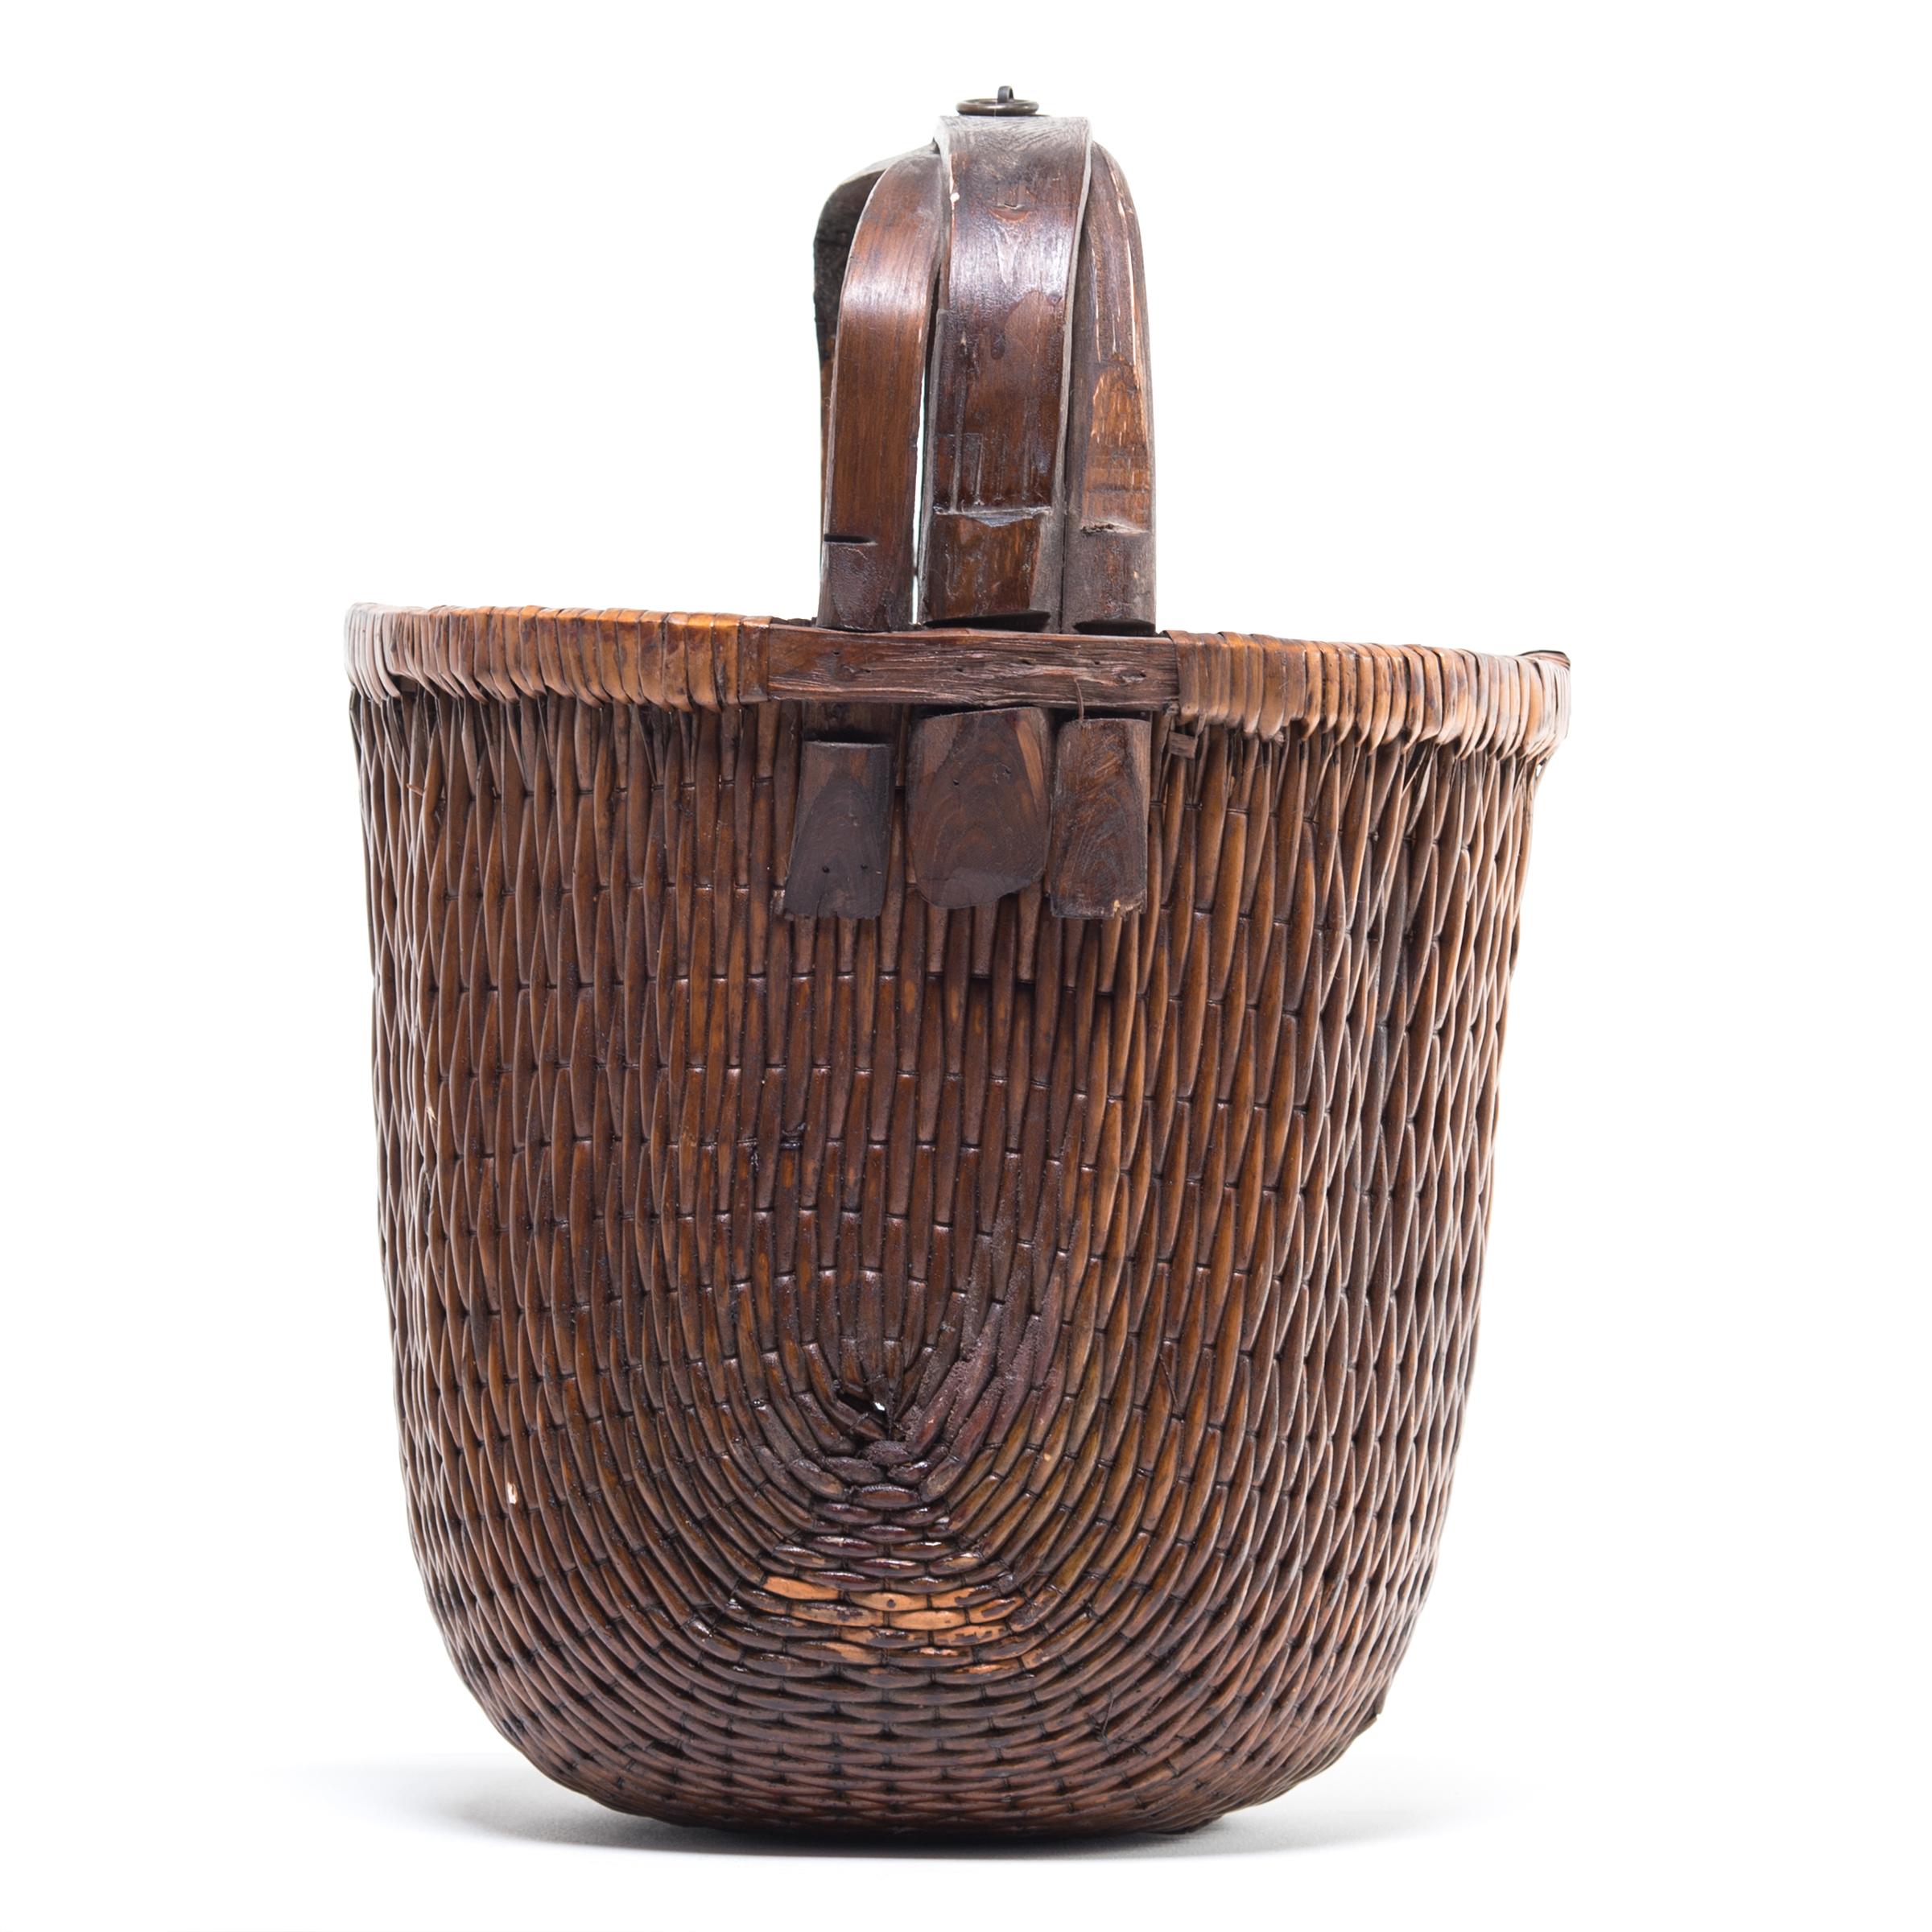 Hand-Woven Early 20th Century Chinese Bent Handle Willow Basket